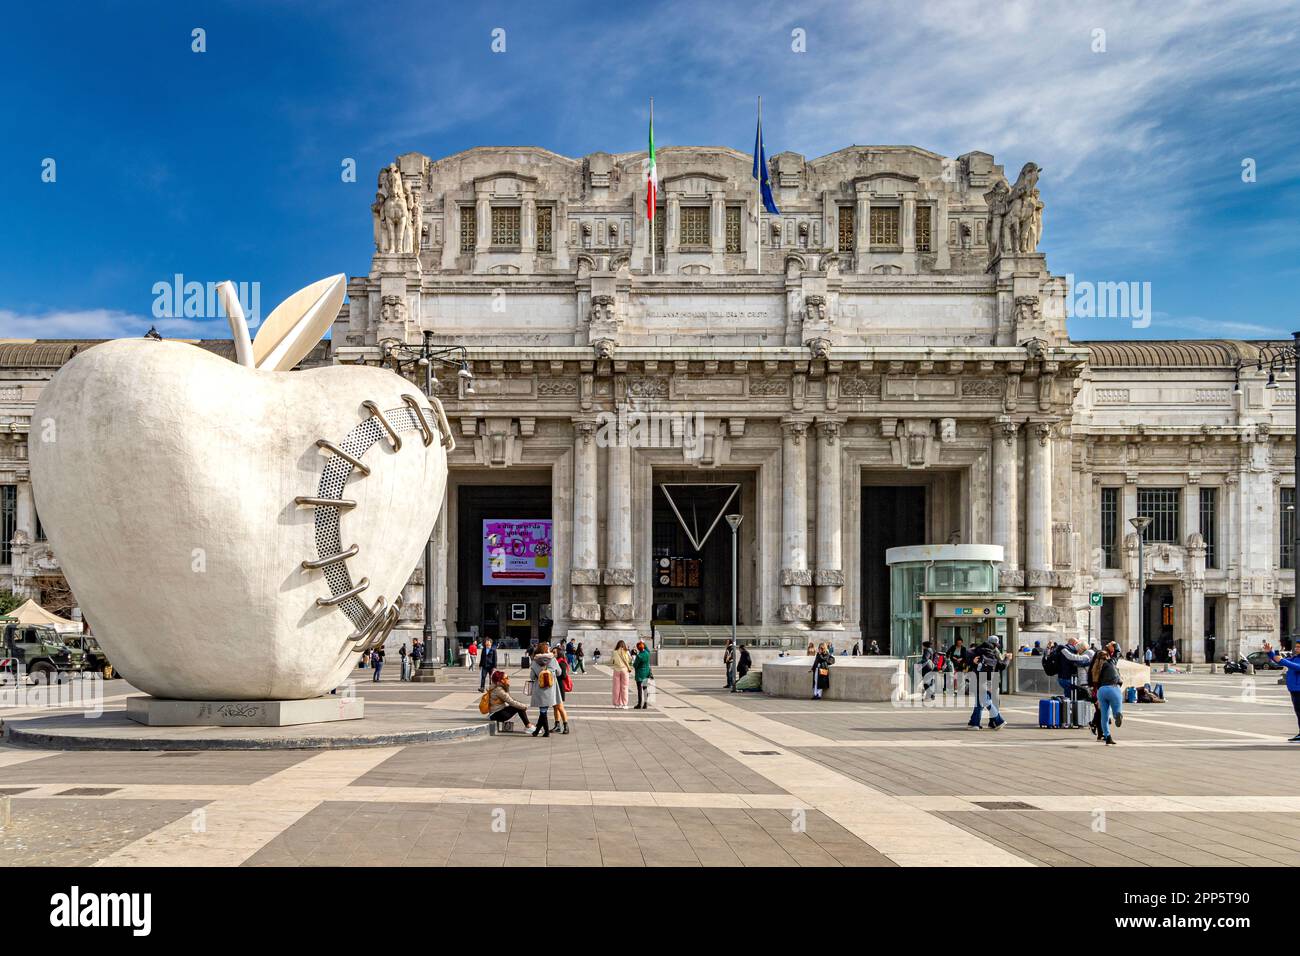 The big apple of Milan, a sculpture by Michelangelo Pistoletto, outside the grand exterior of  Milano Centrale railway station,Milan ,Italy Stock Photo